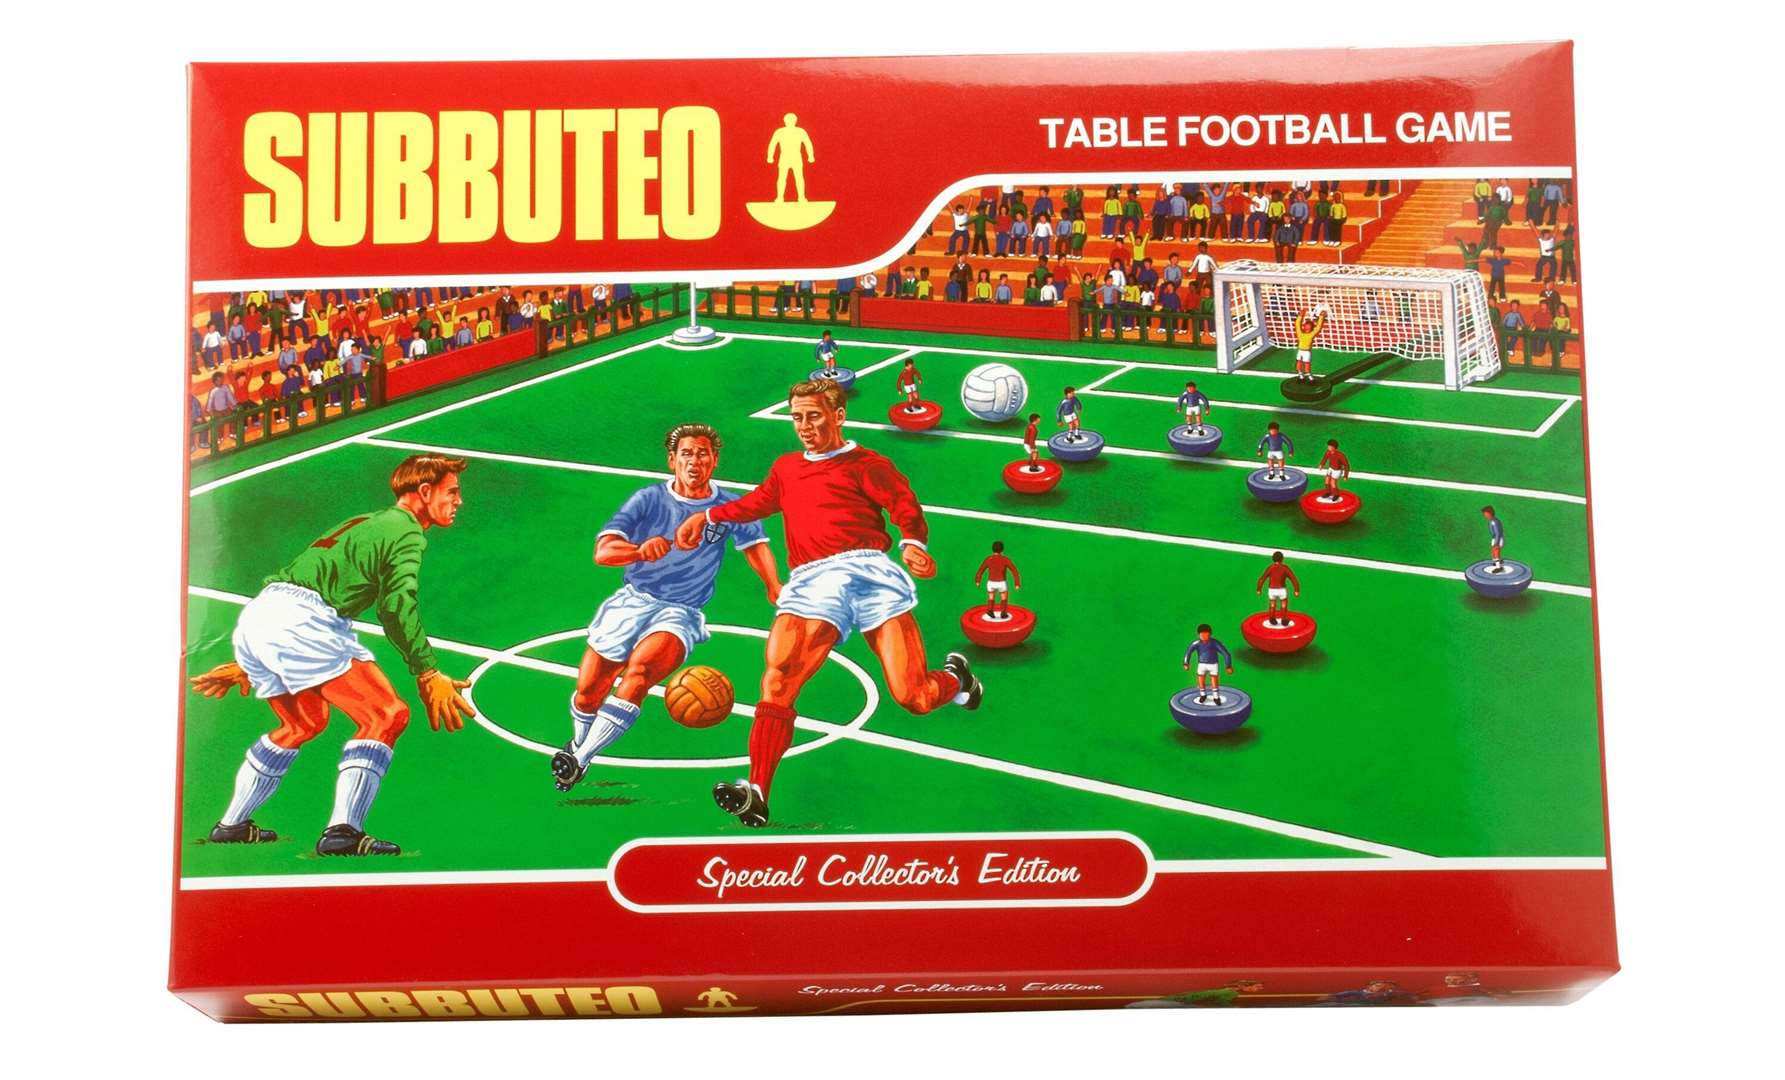 The collector's edition of Subbuteo is being sold at John Lewis